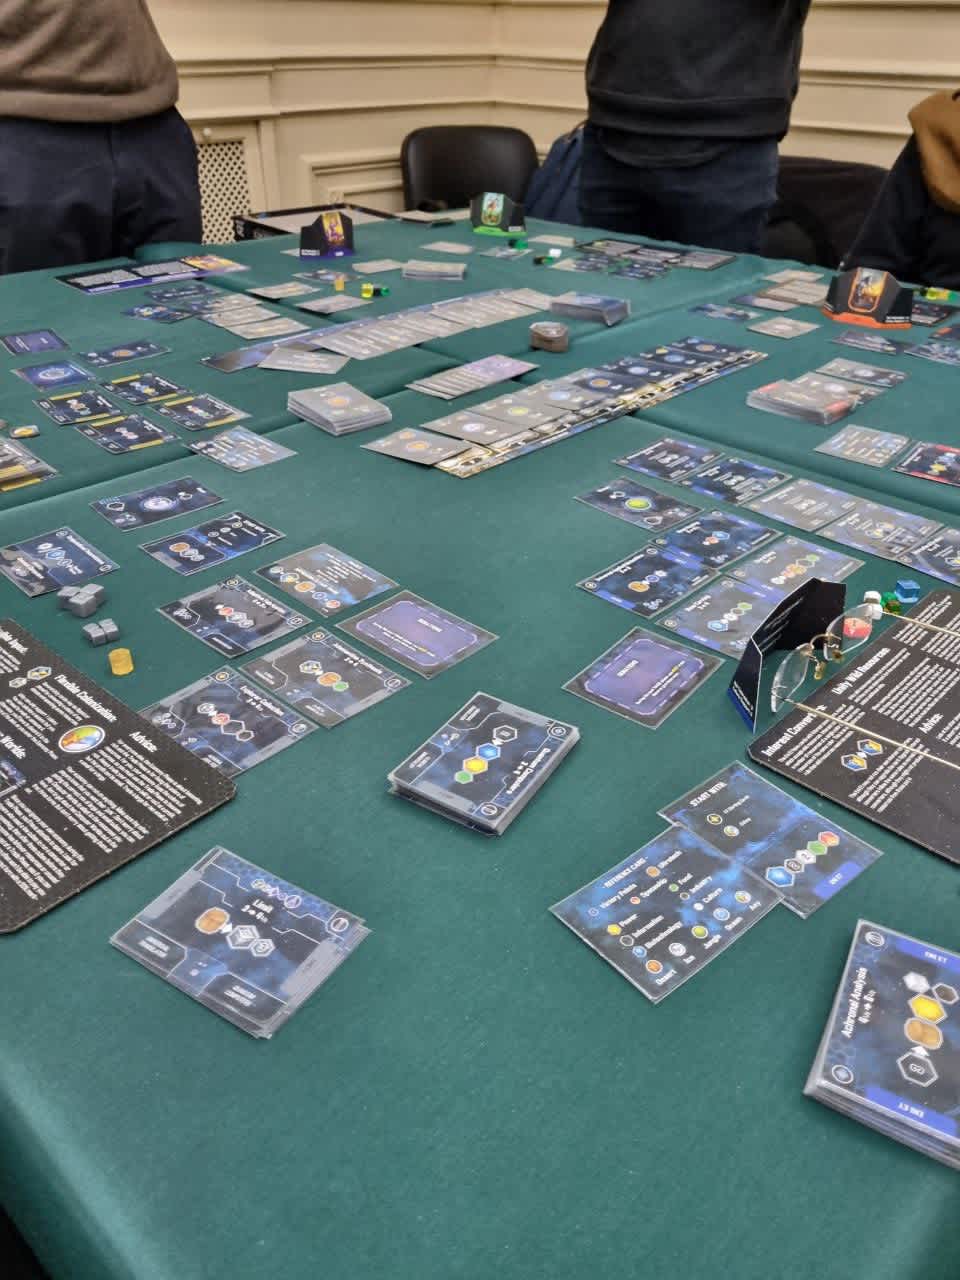 Sidereal Confluence